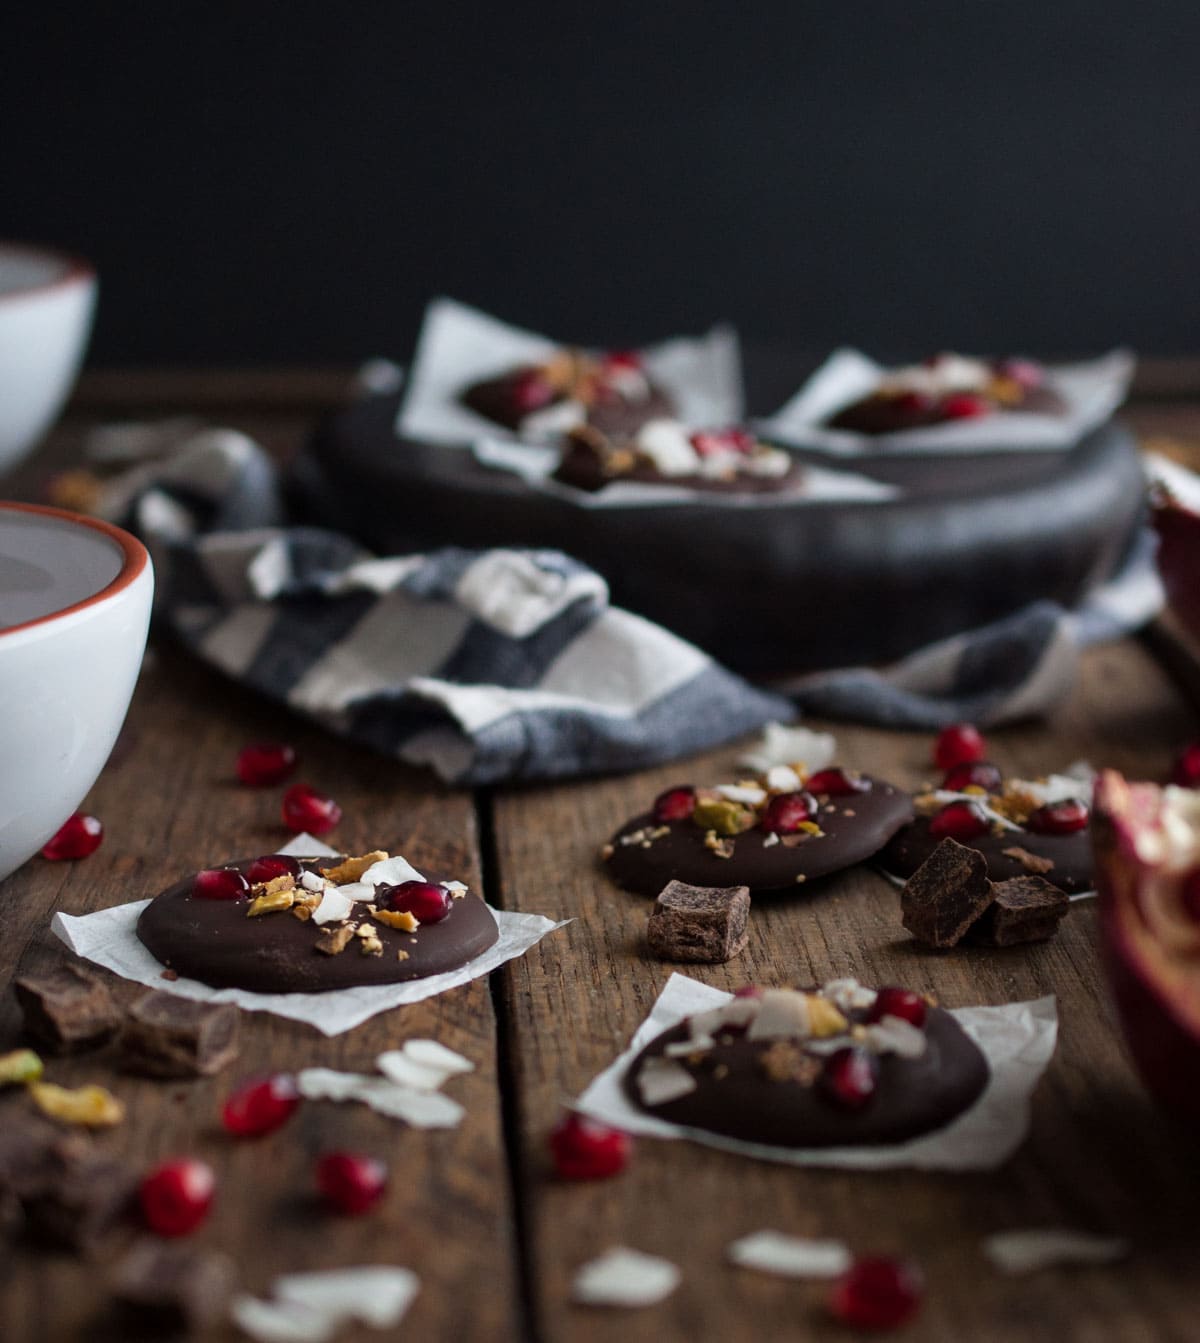 Dark chocolate pomegranate bites are a simple tasty treat to eat or give as Christmas gifts. Made to satisfy a sweet tooth for under 100 calories! 